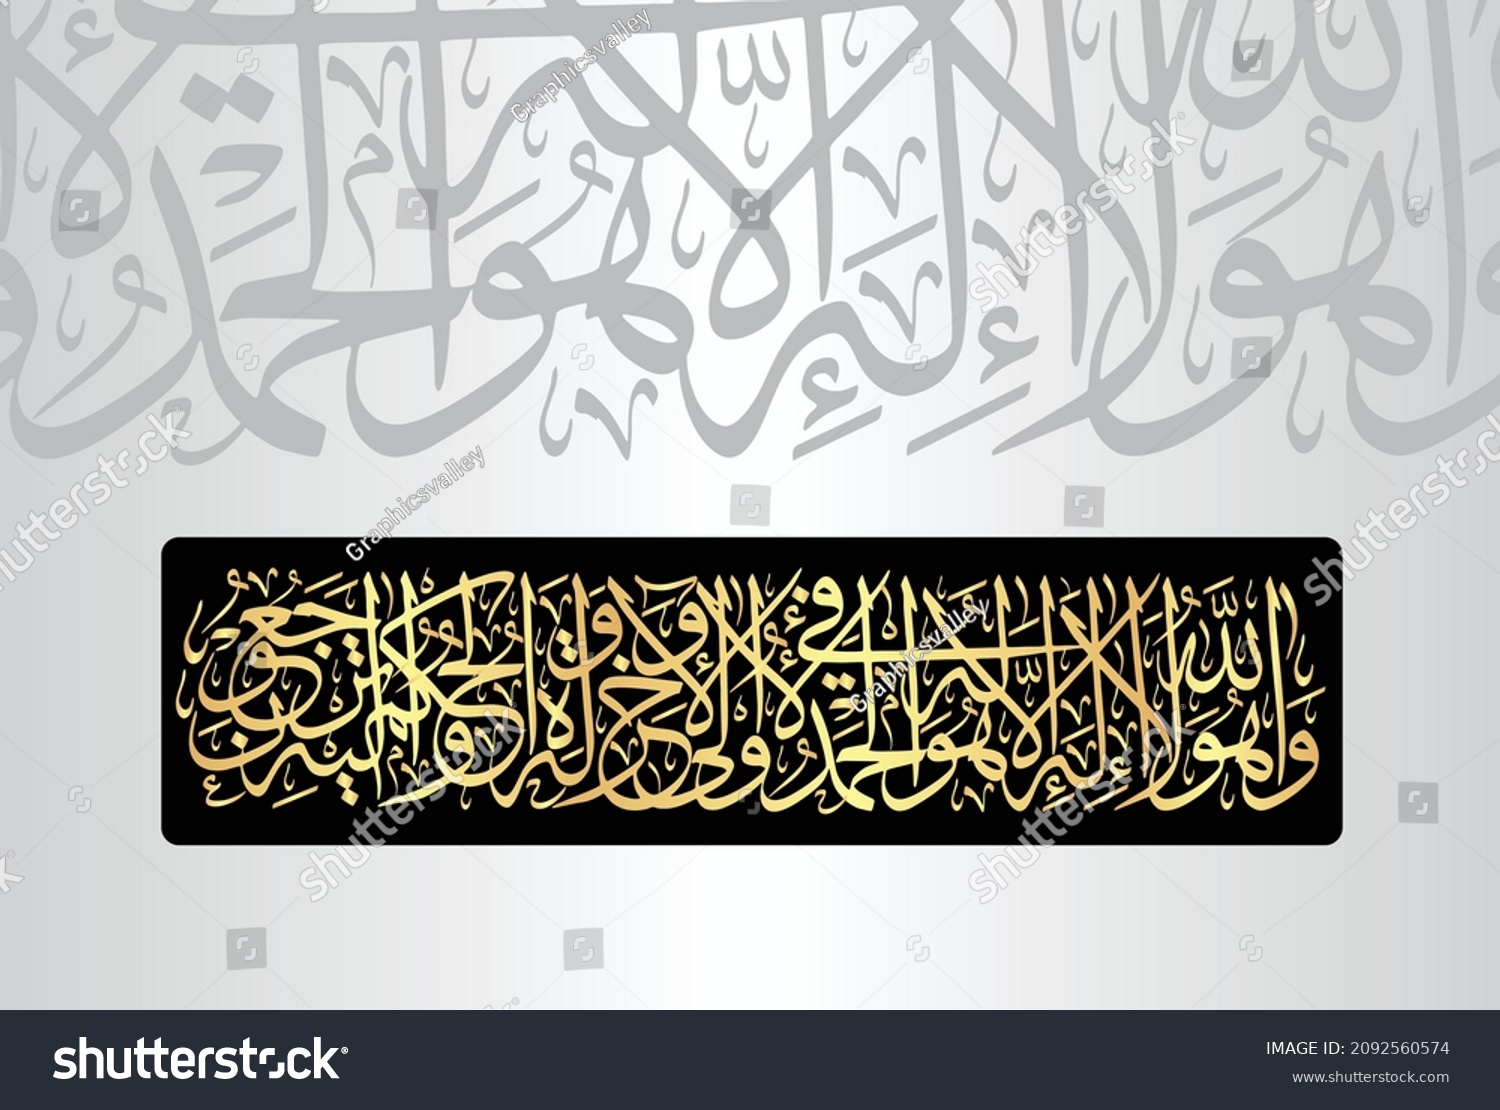 SVG of Arabic Calligraphy from verse number 70 from chapter 